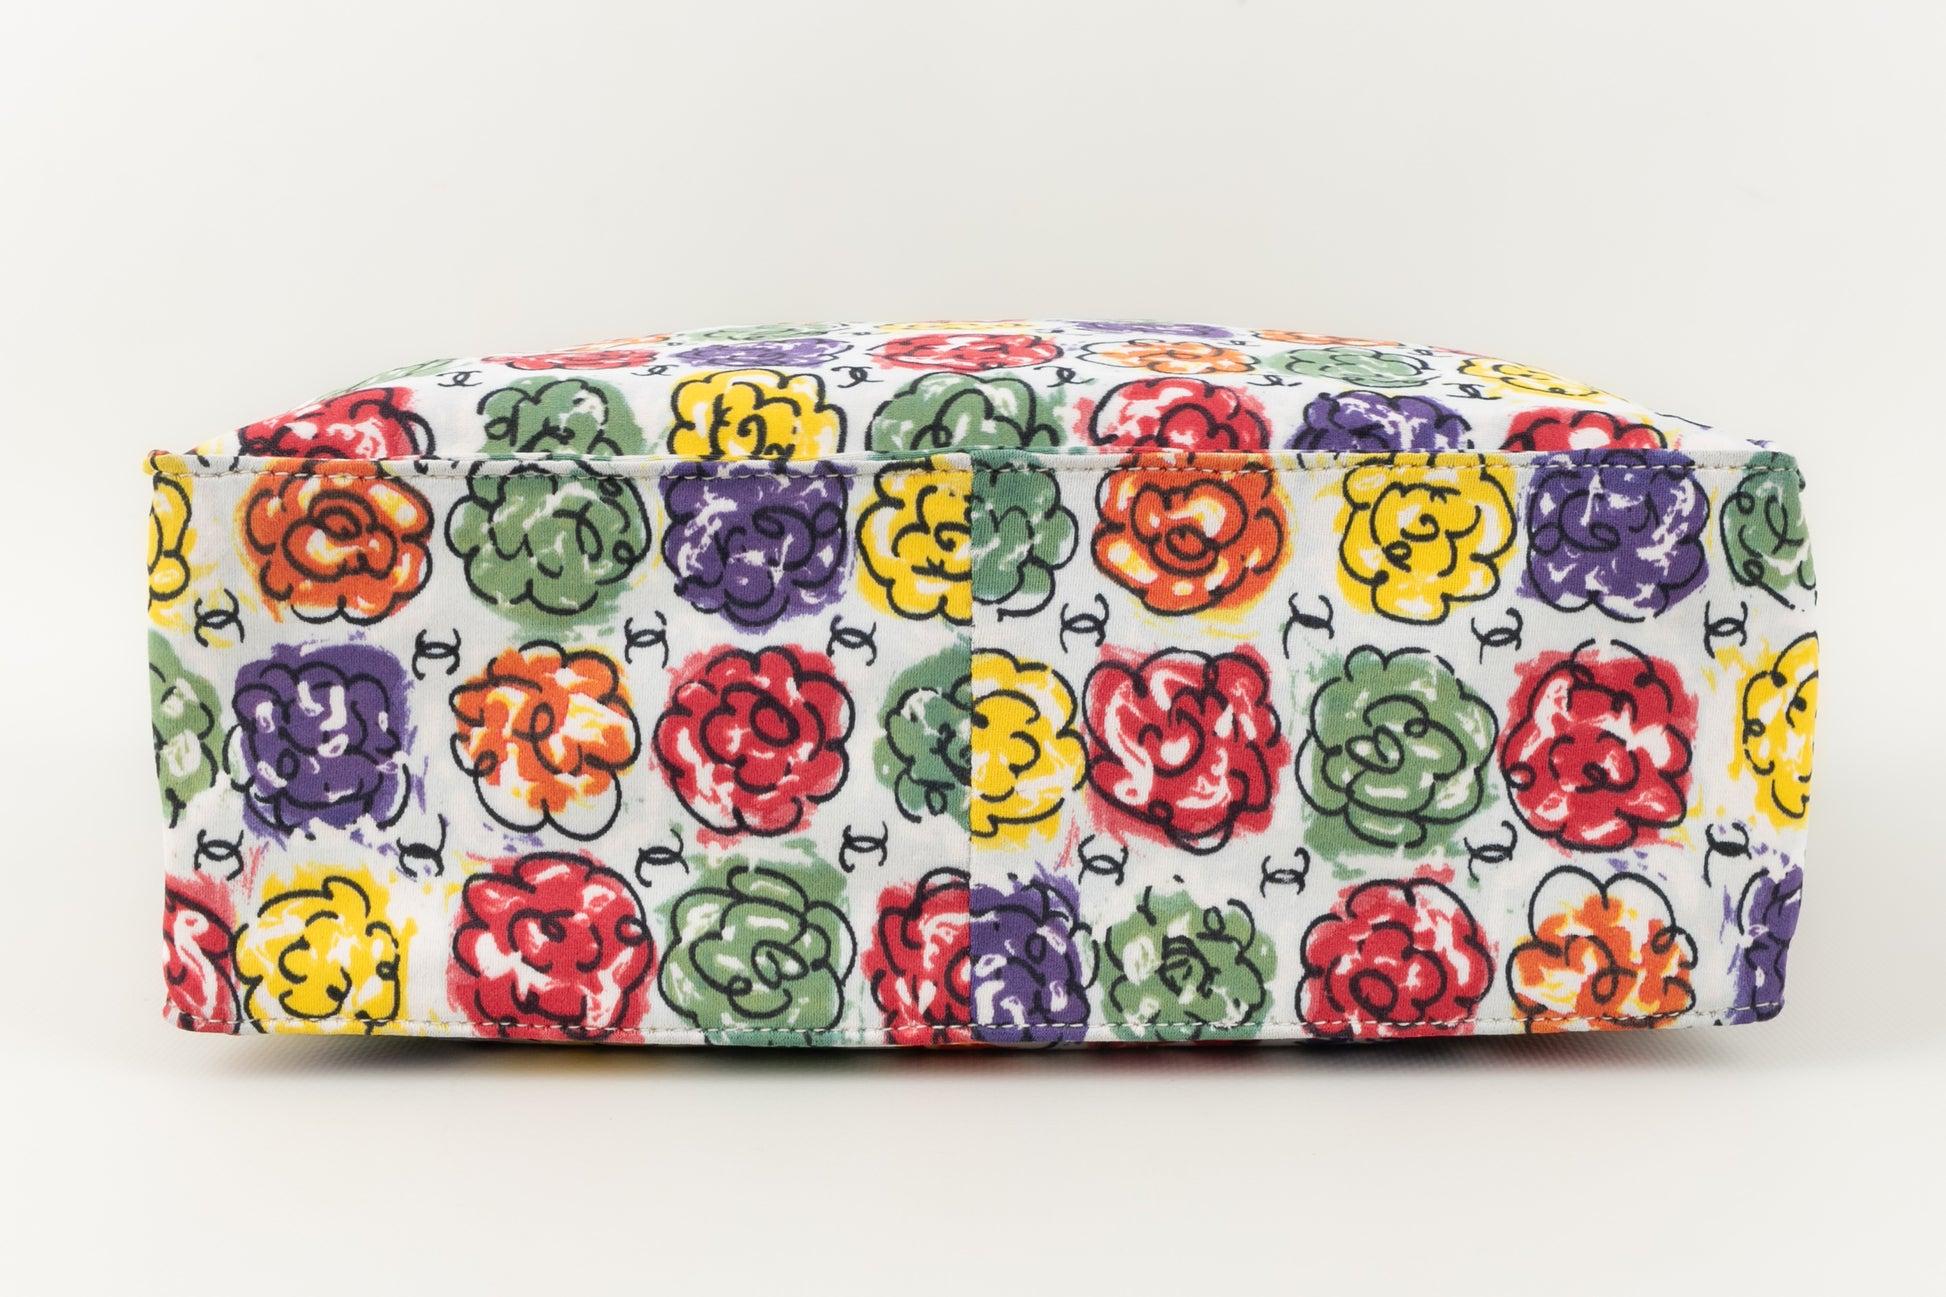 Chanel Canvas Bag Printed with Multicolored Flowers, 1997 / 1999 For Sale 2